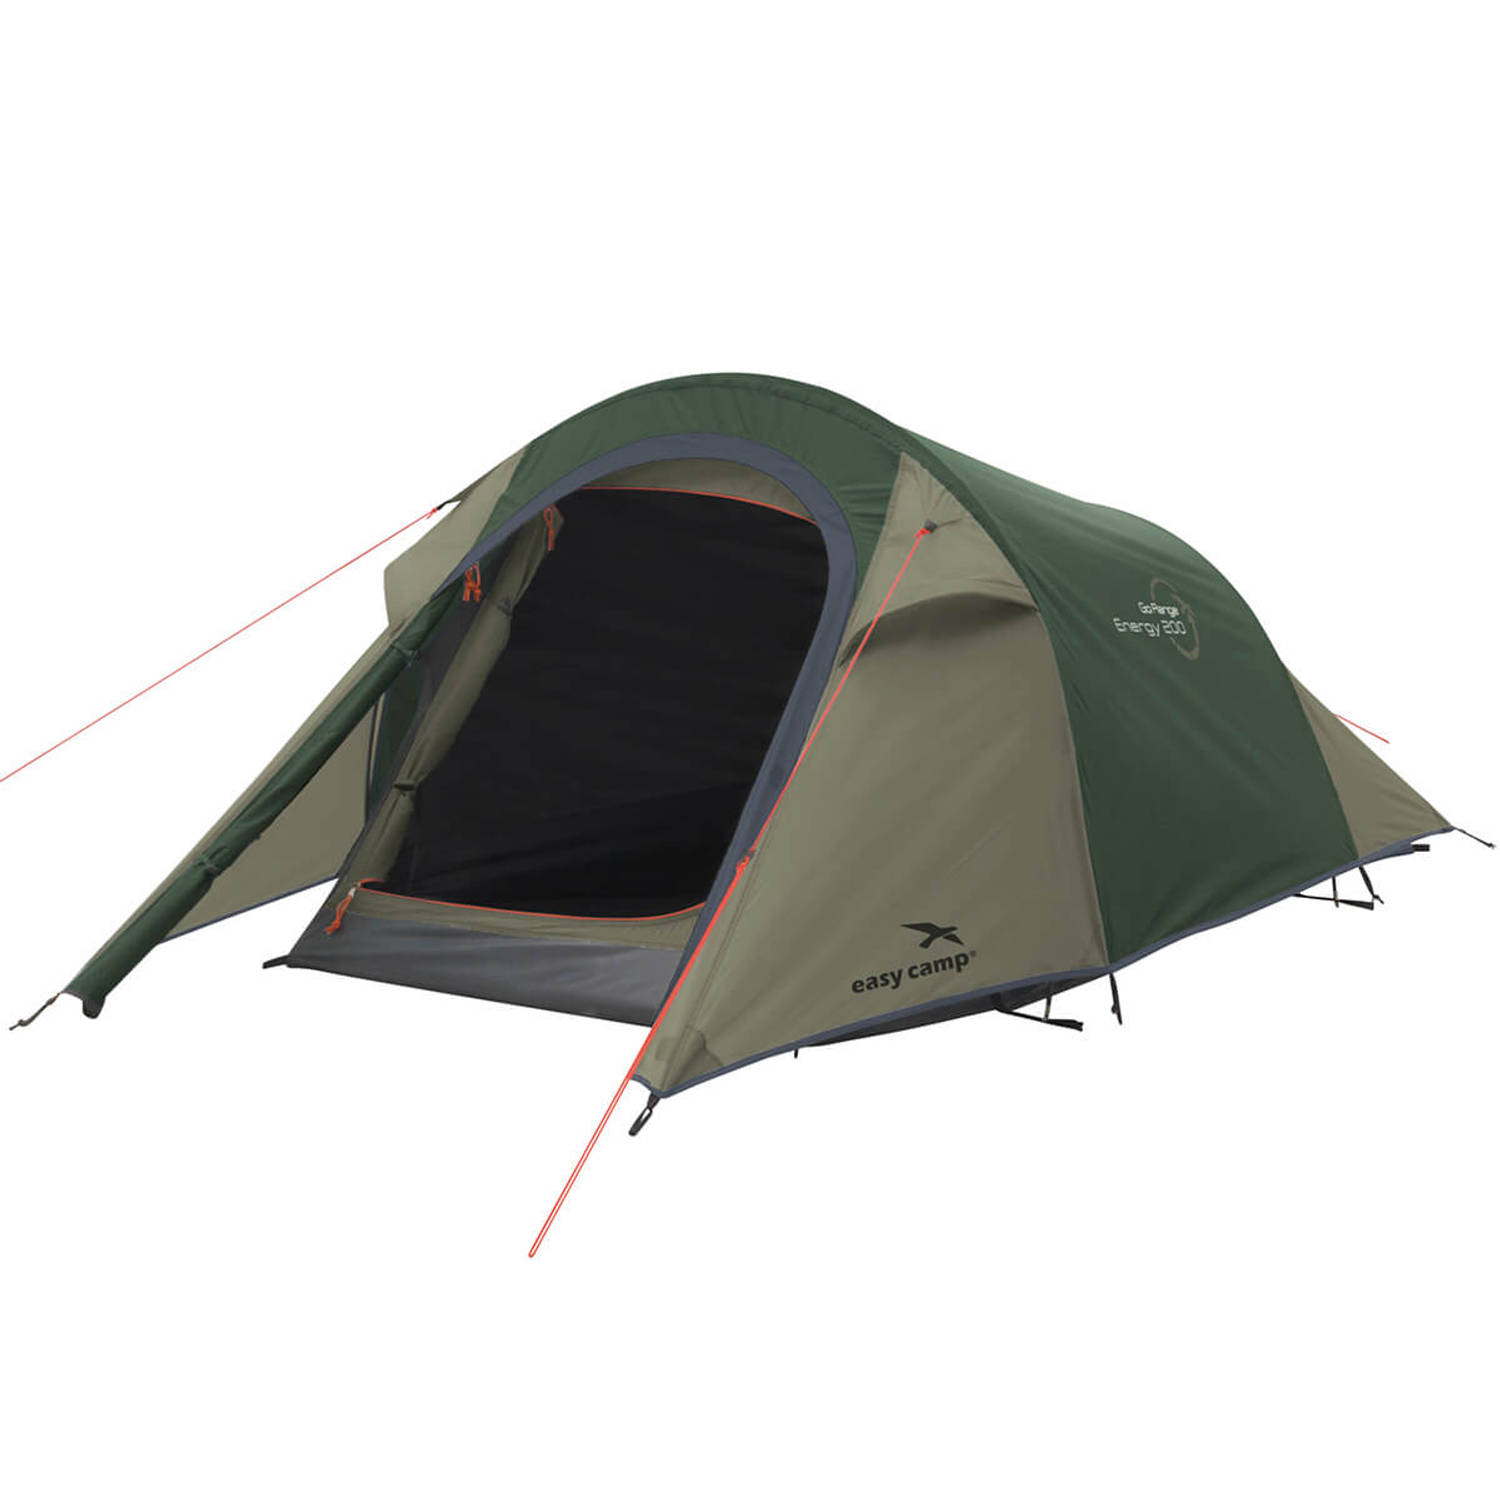 Easy Camp Easy Camp Energy 200 tent